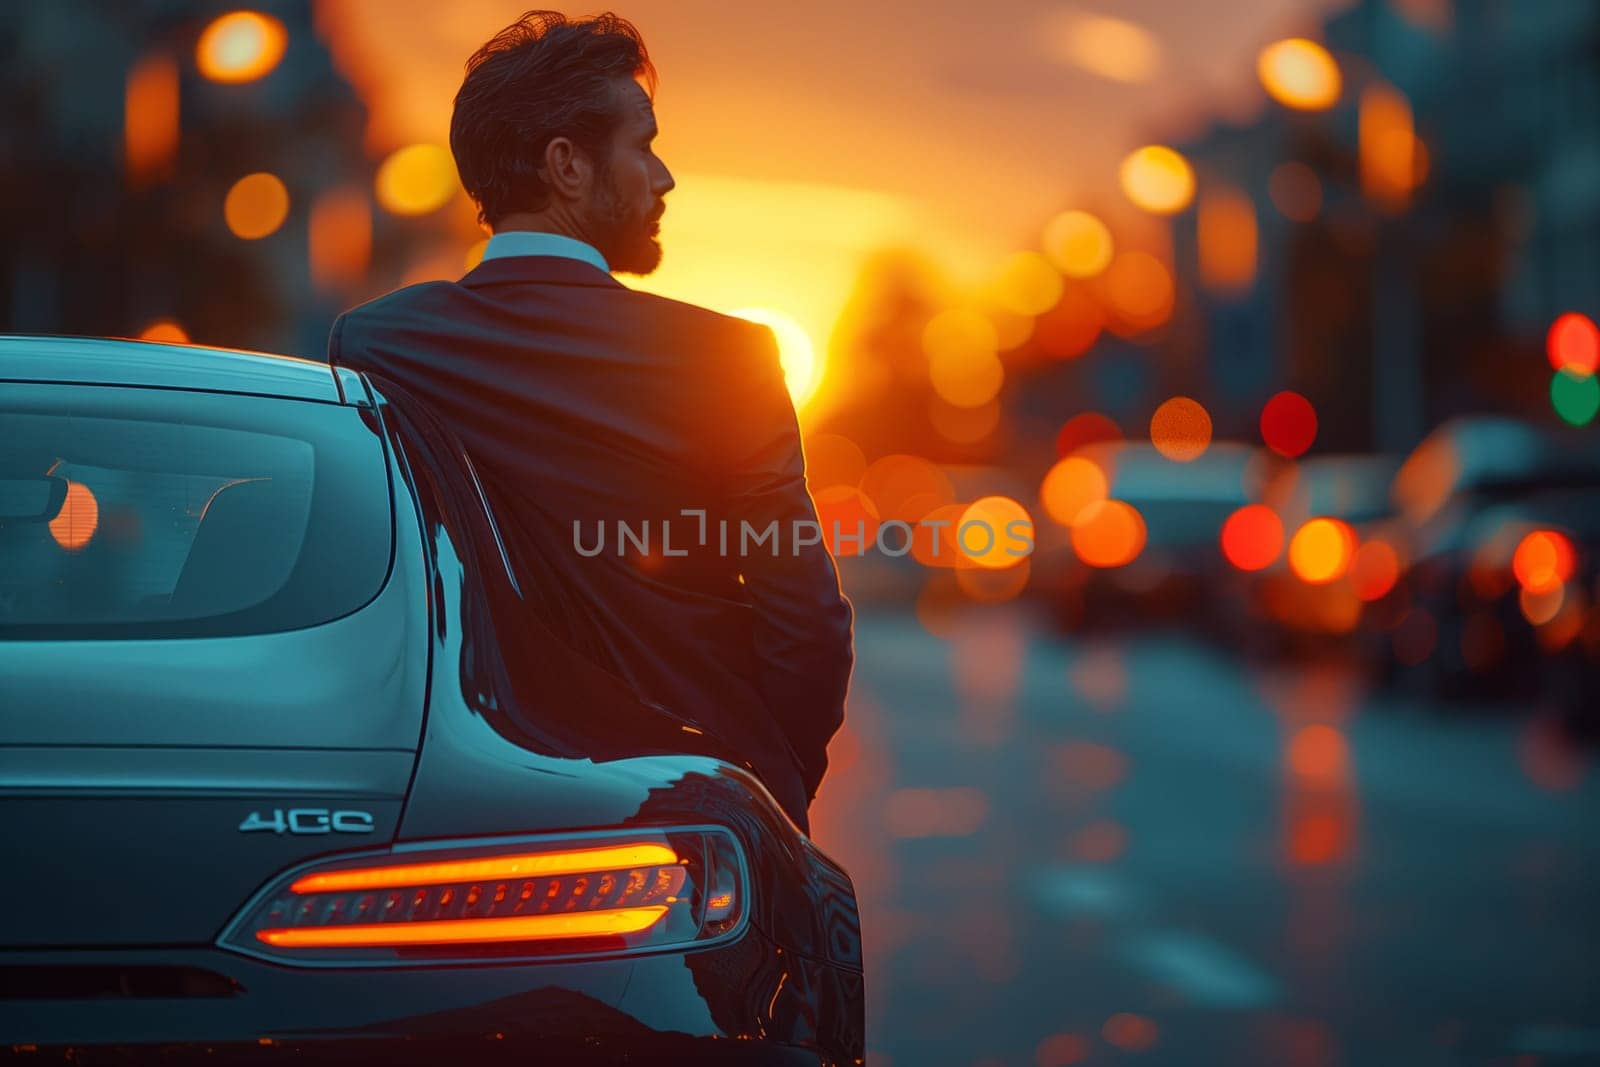 A man in a suit is admiring the sunset from the back of a car by richwolf